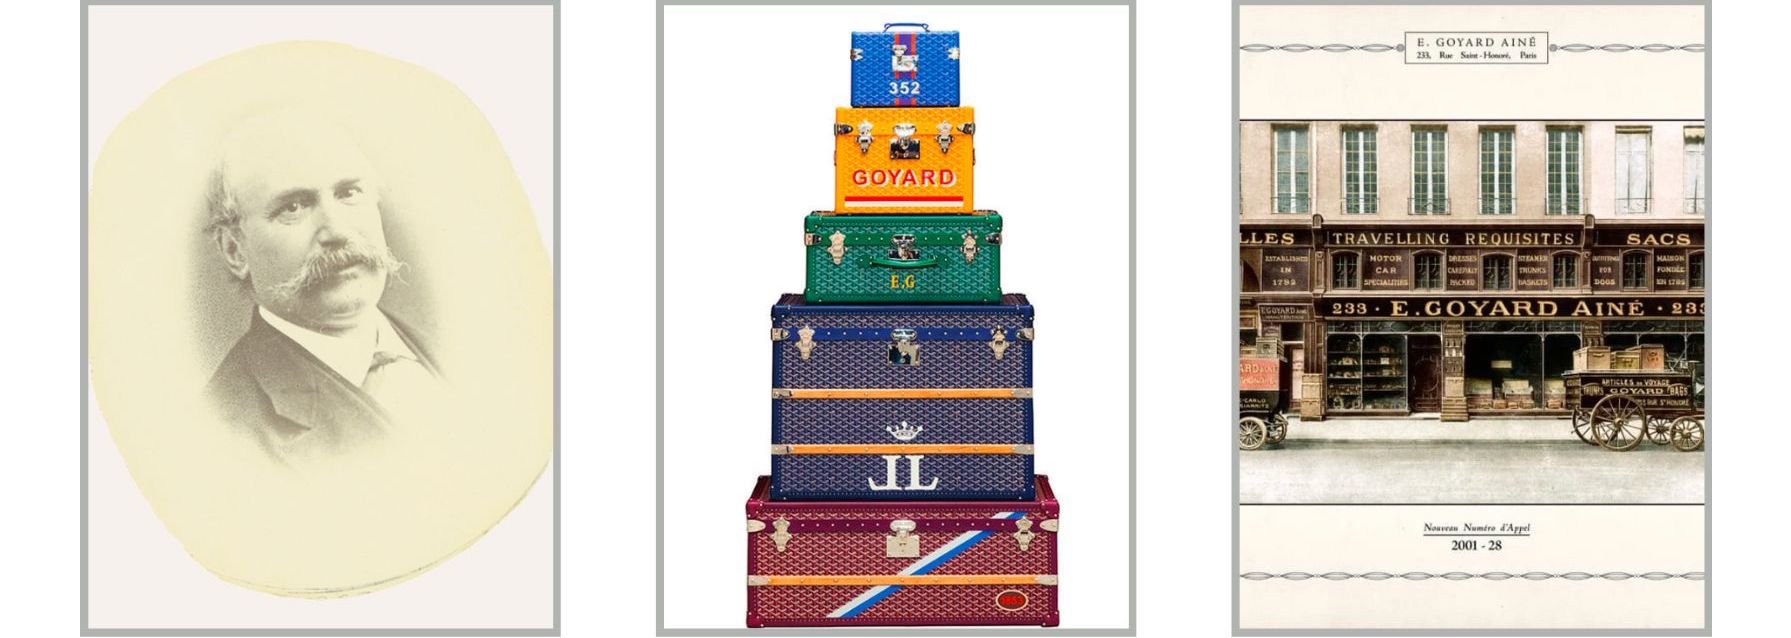 Find out how to secure your Goyard bag at The Handbag Clinic